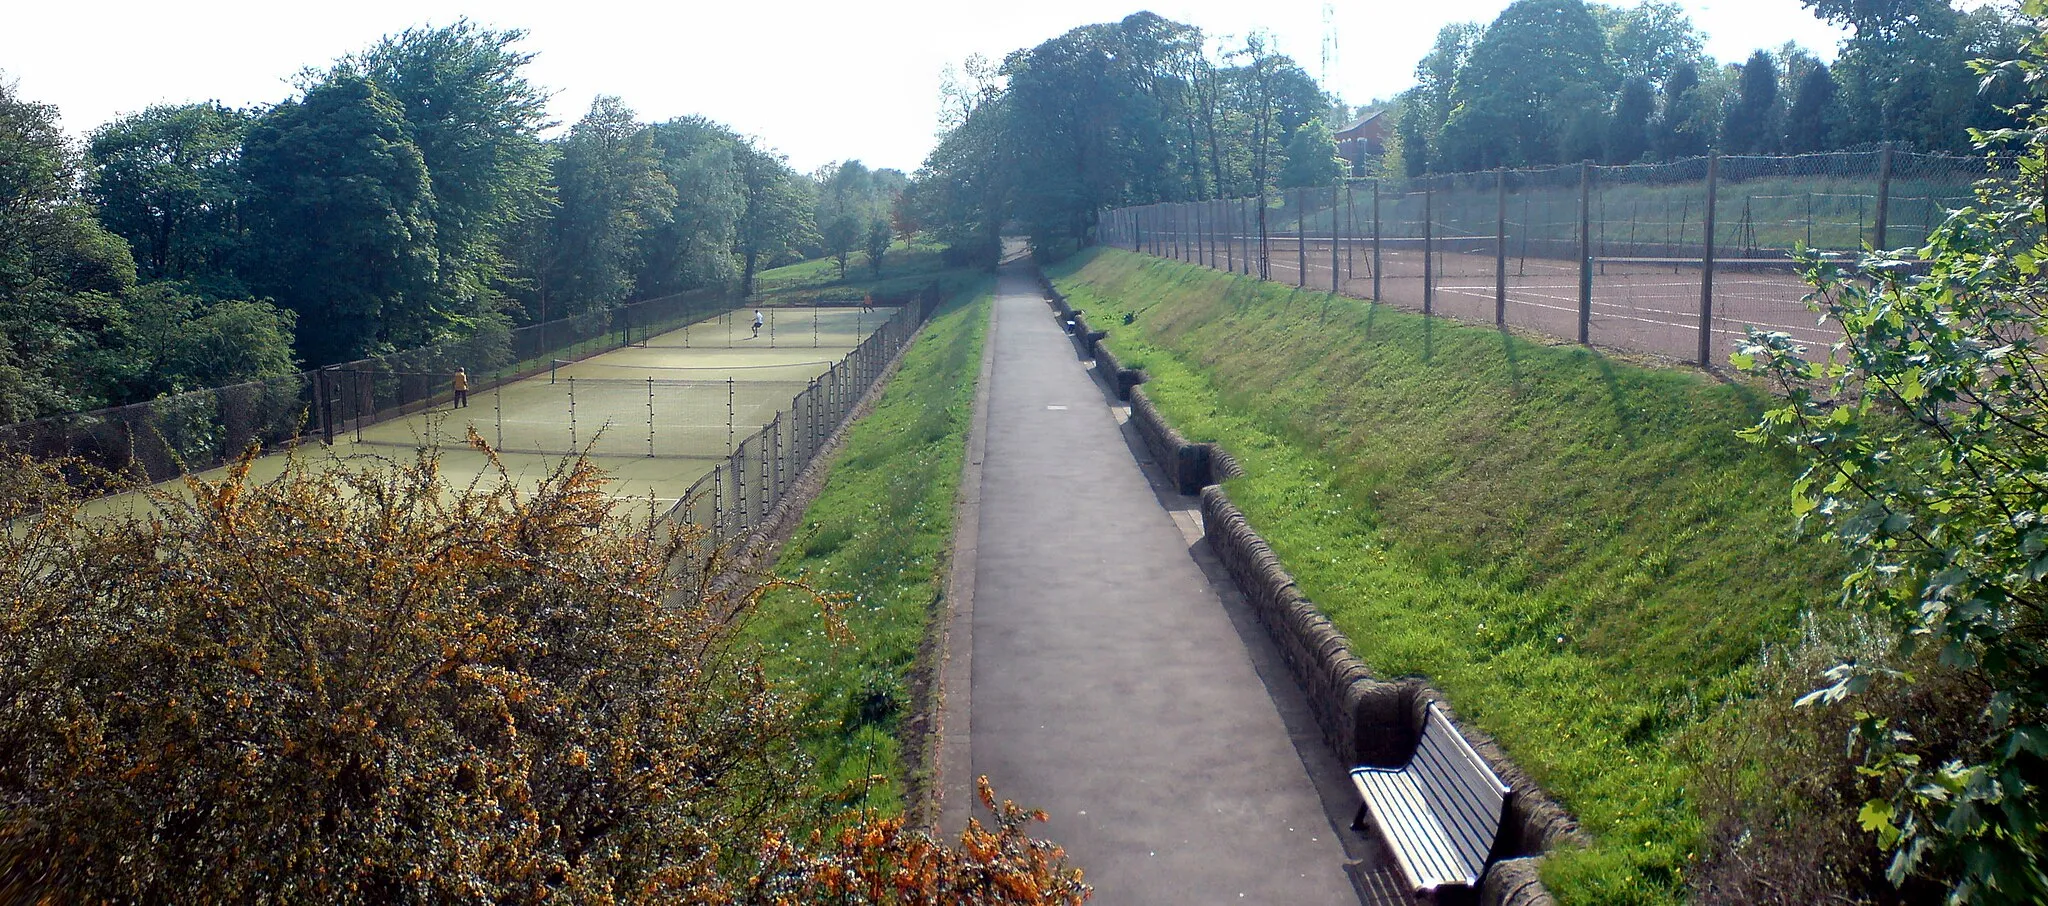 Photo showing: Tiered tennis courts in Corporation Park, Blackburn, UK